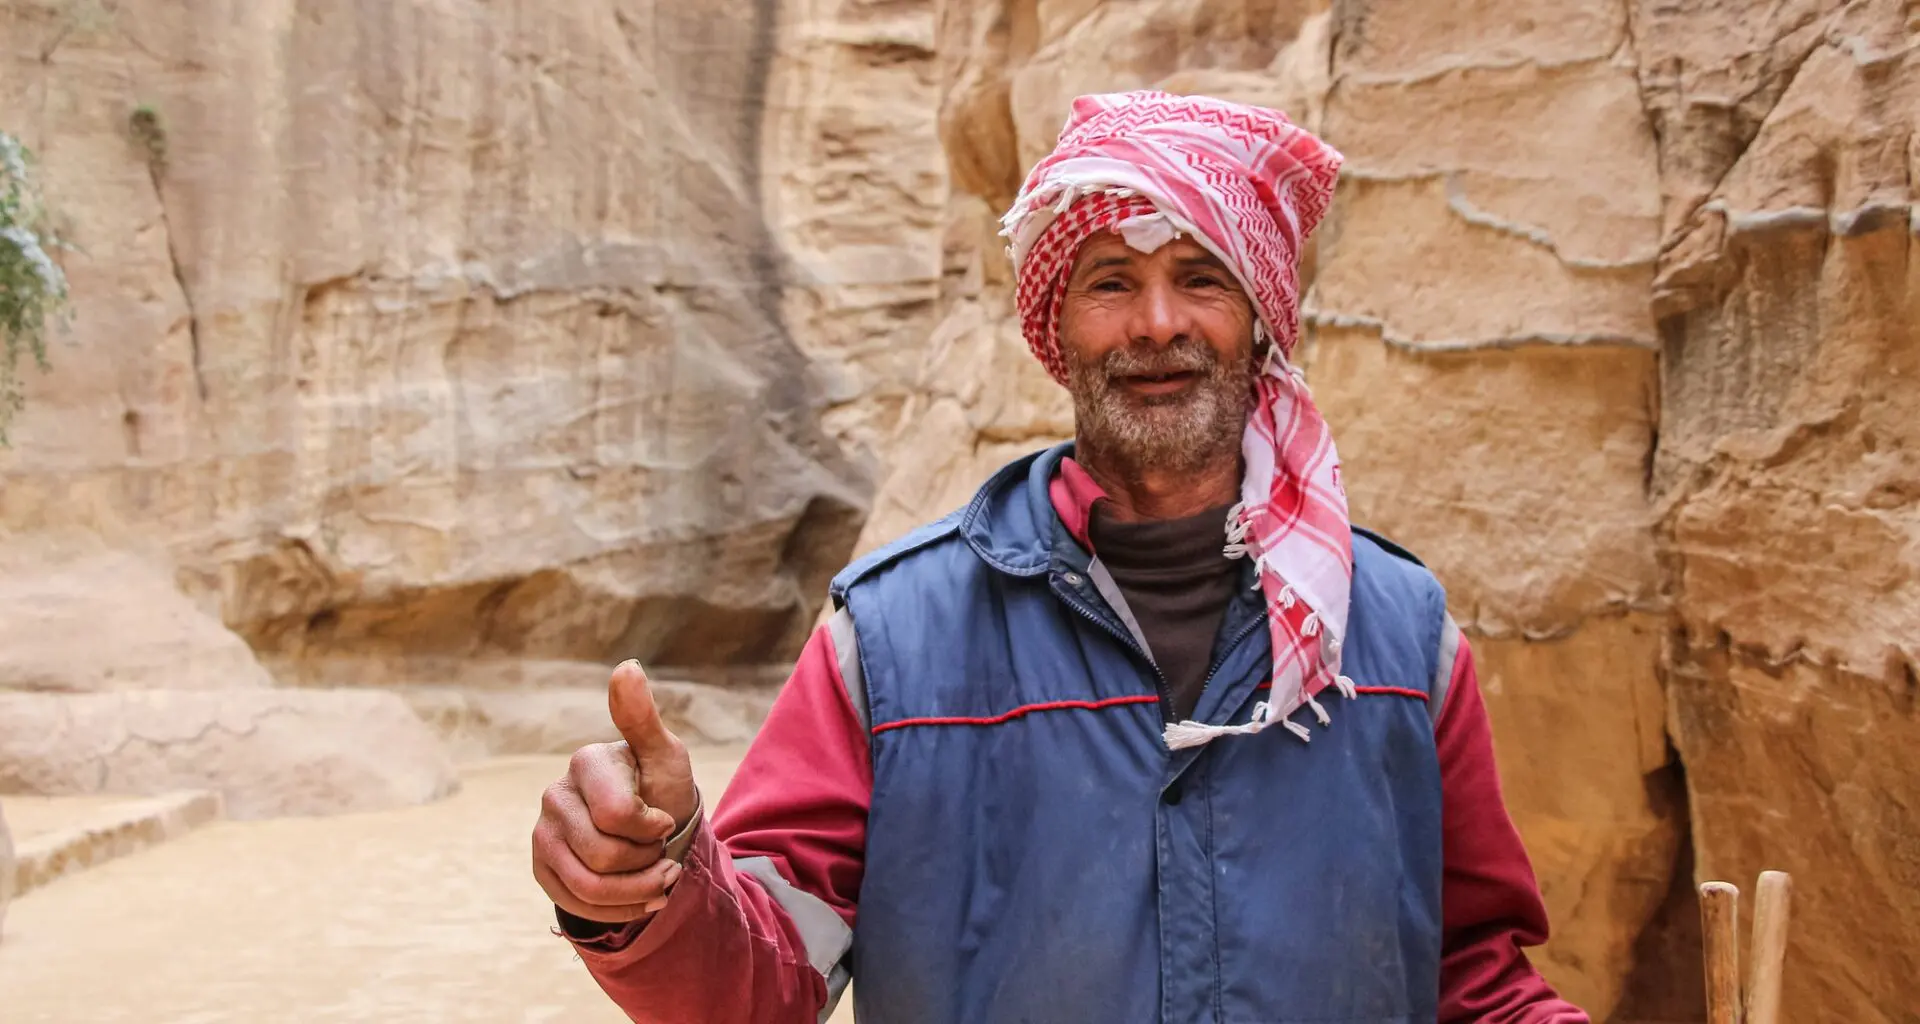 A man in a red and white headscarf, typical of Jordanian attire, standing before a rocky desert background.